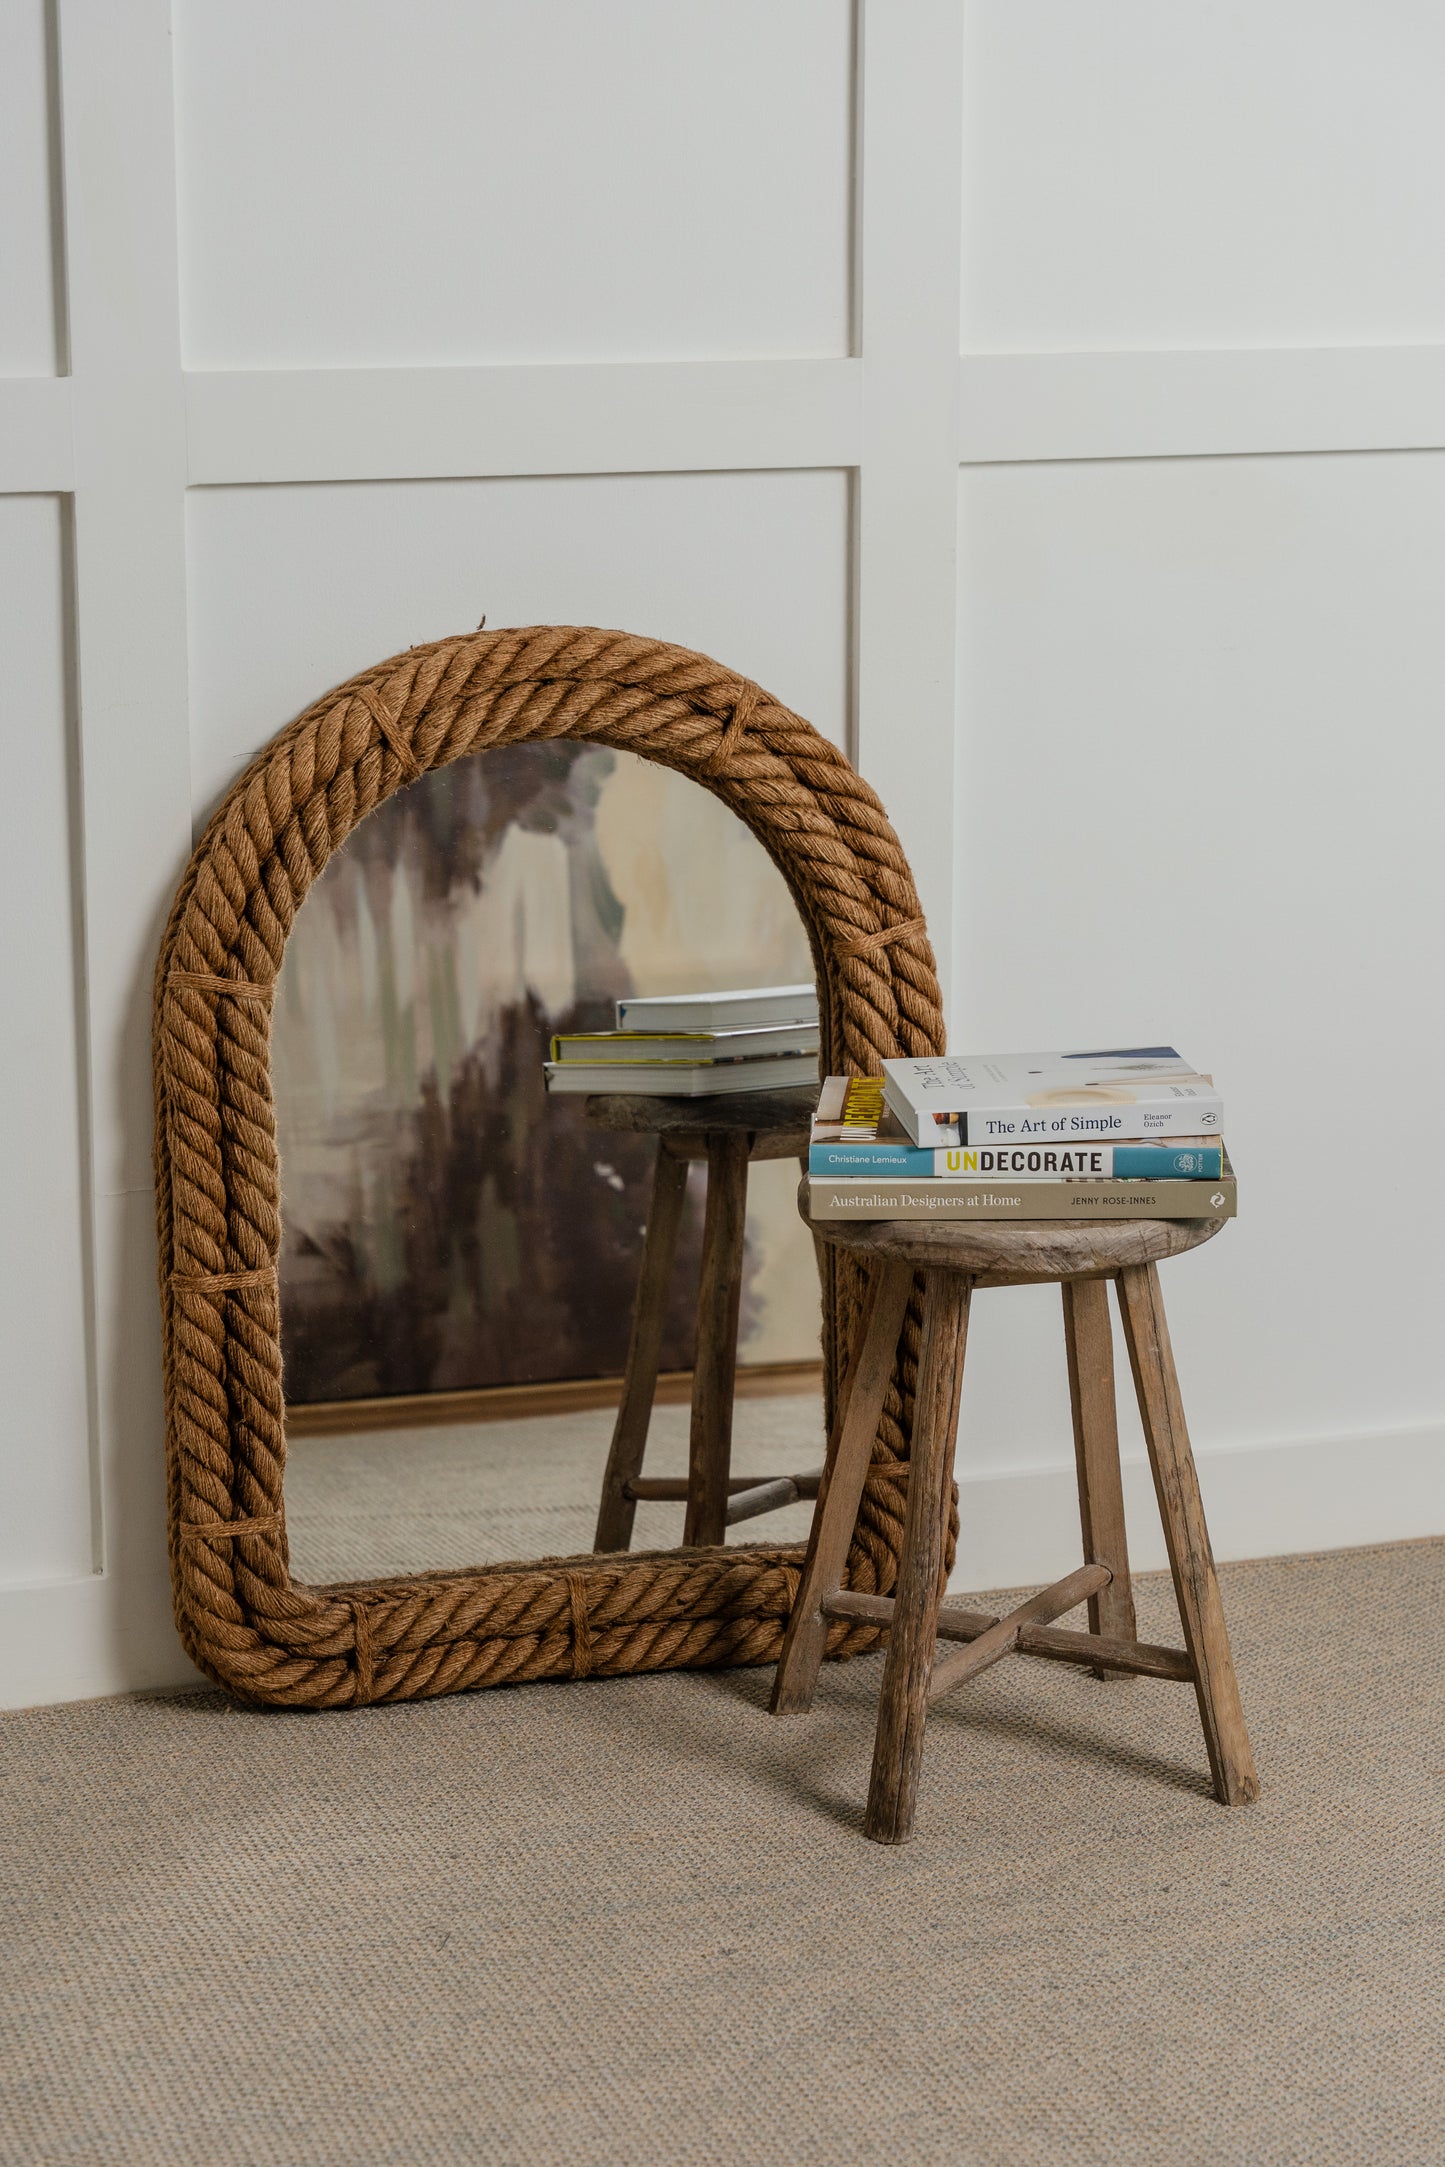 ROPE ARCH MIRROR - NATURAL